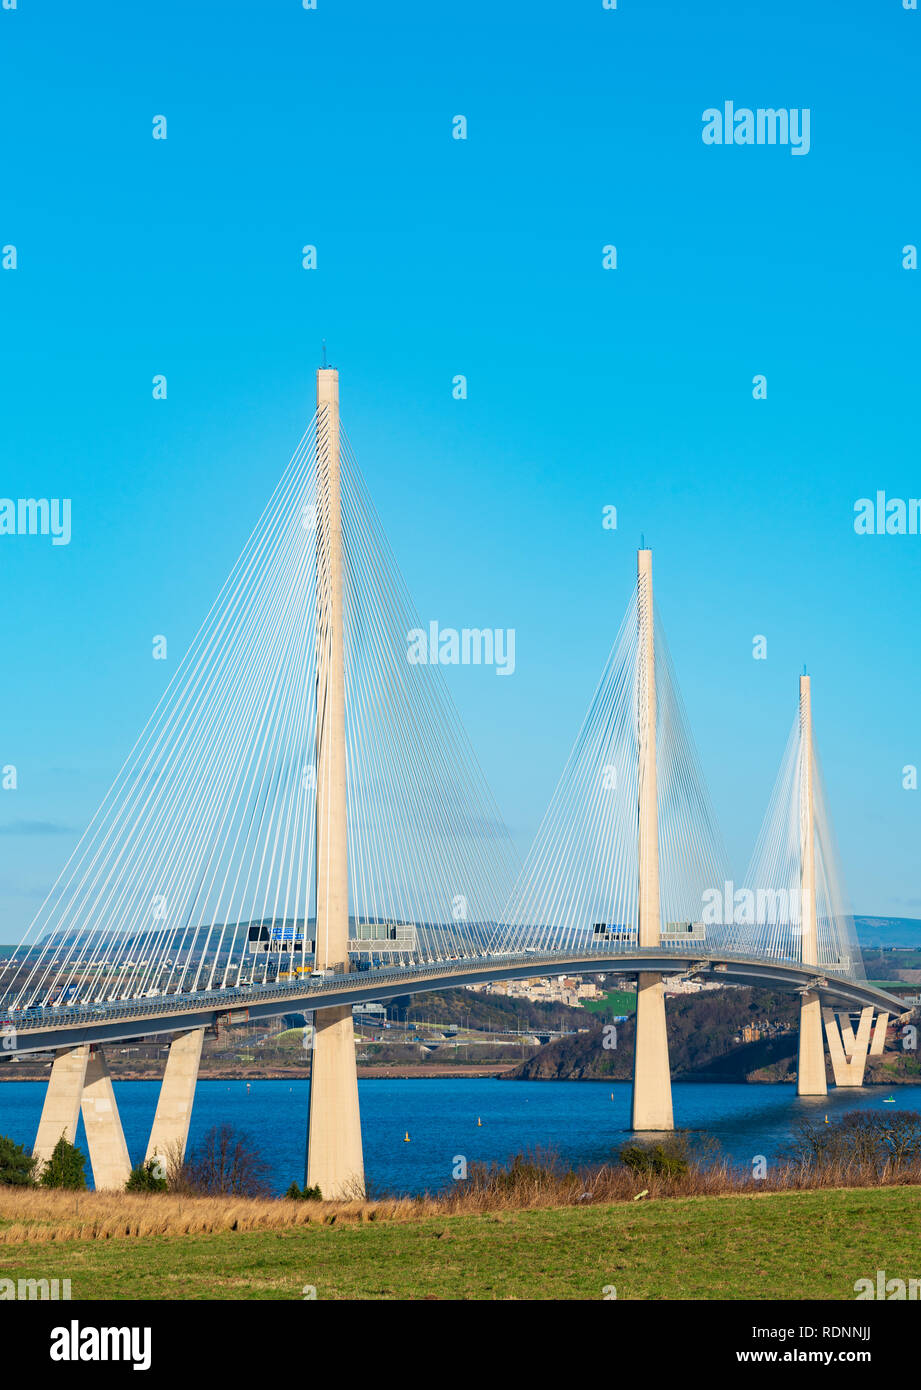 View of Queensferry Crossing Bridge spanning the Firth Of Forth river at South Queensferry in Scotland, UK Stock Photo